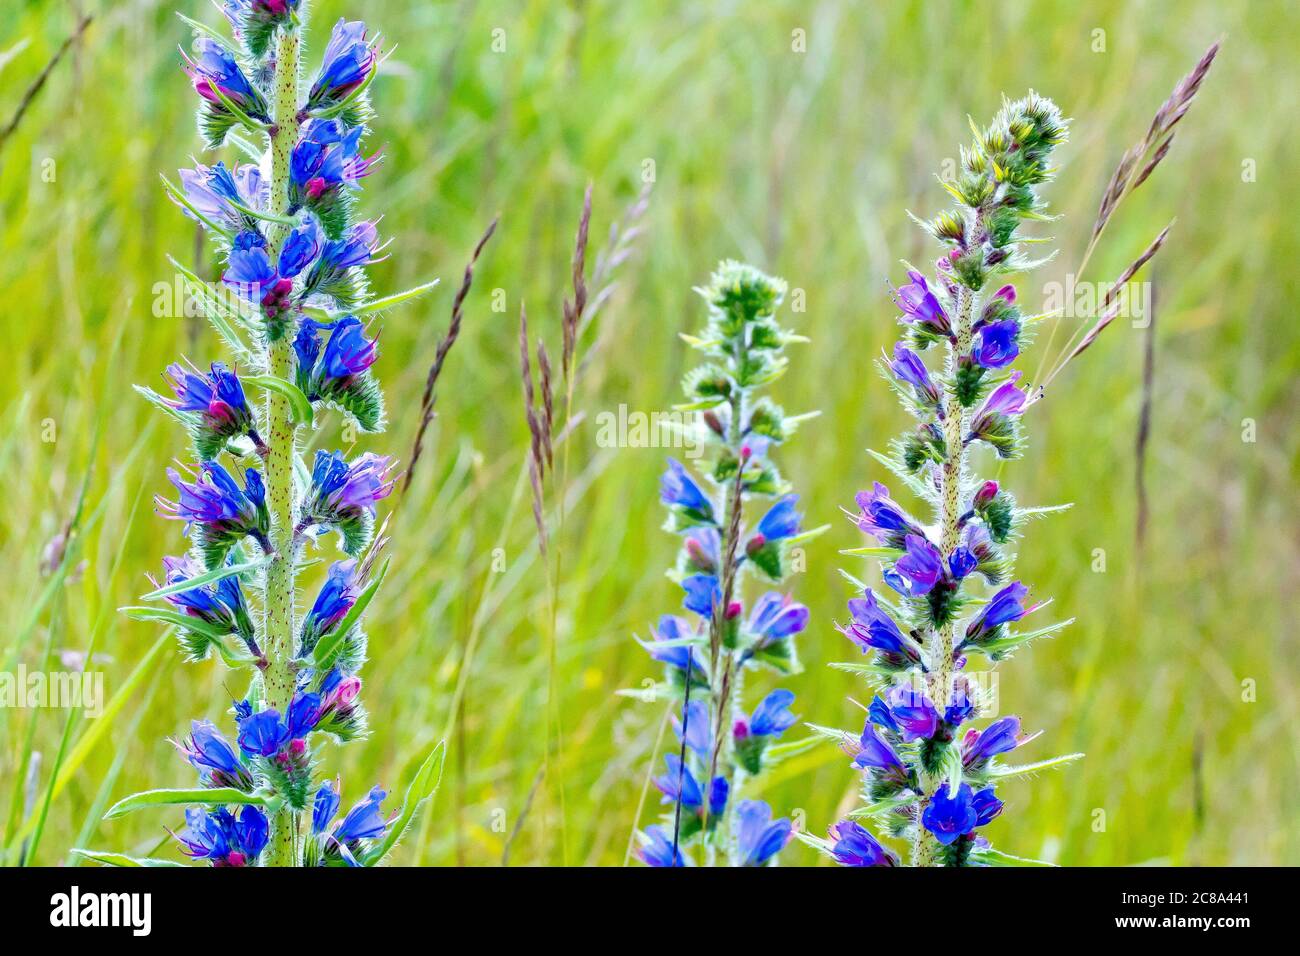 Viper's Bugloss (echium vulgare), close up of a group of flowering spikes growing in long grass. Stock Photo